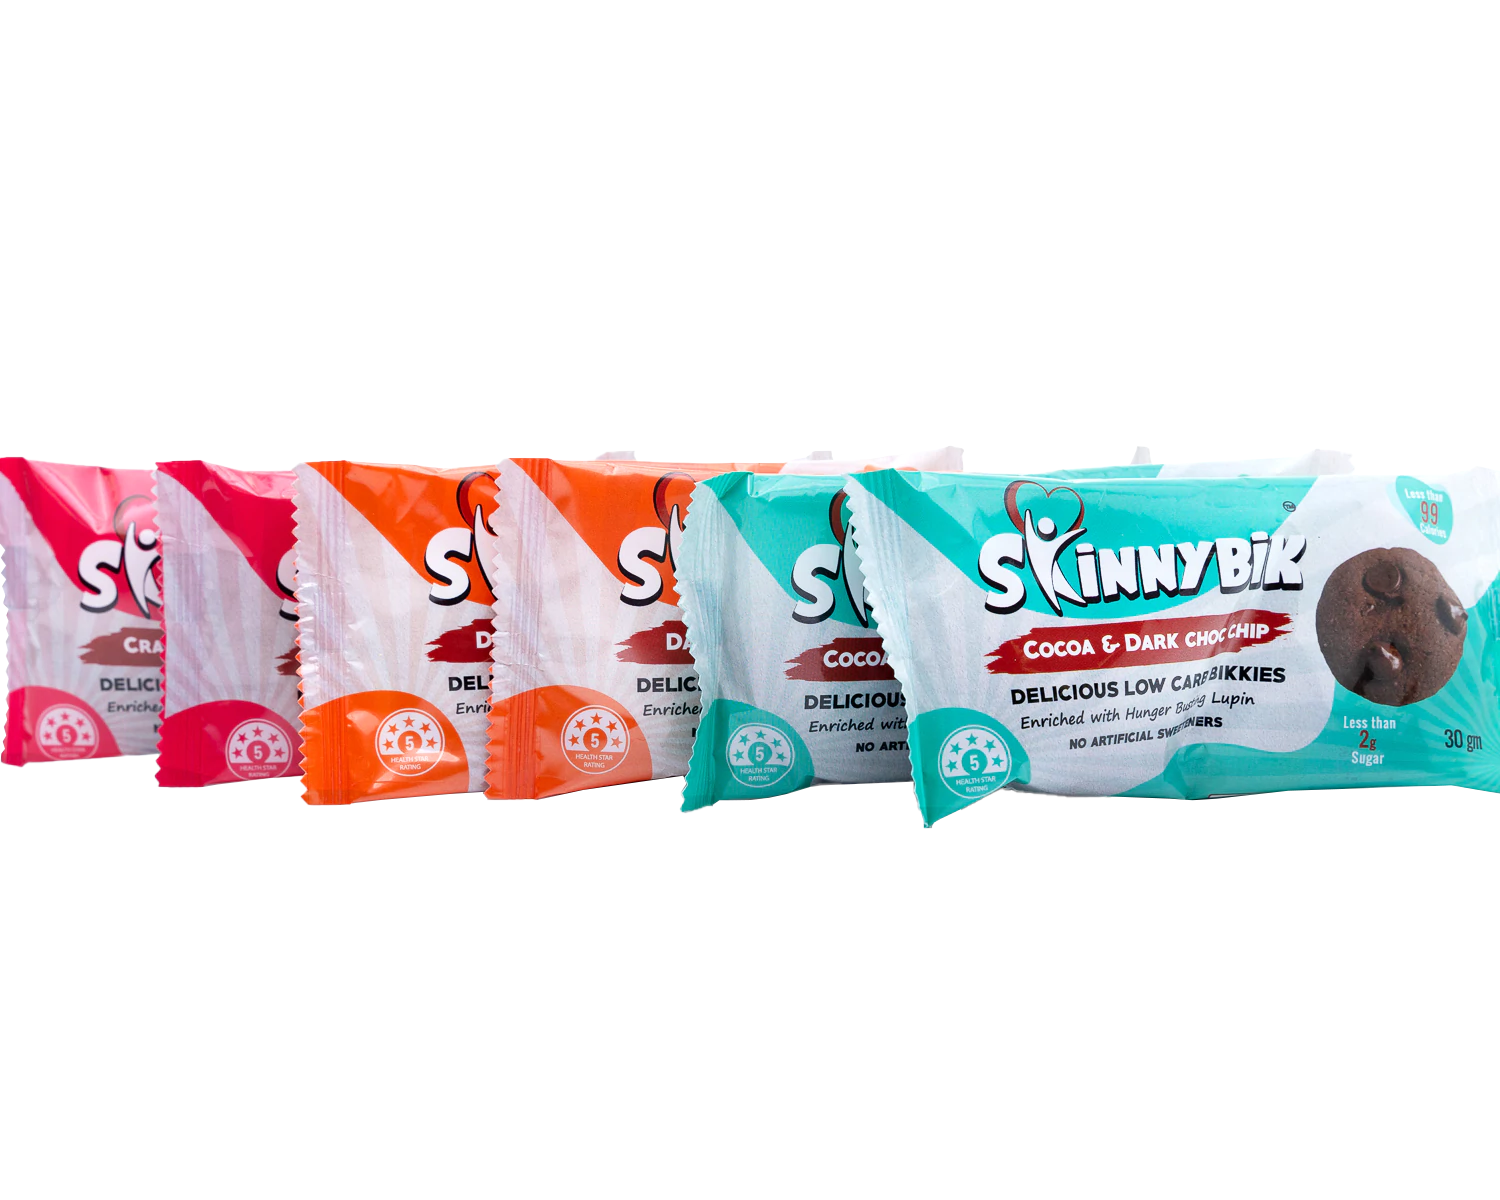 Skinnybik Lupin Biscuits all flavours